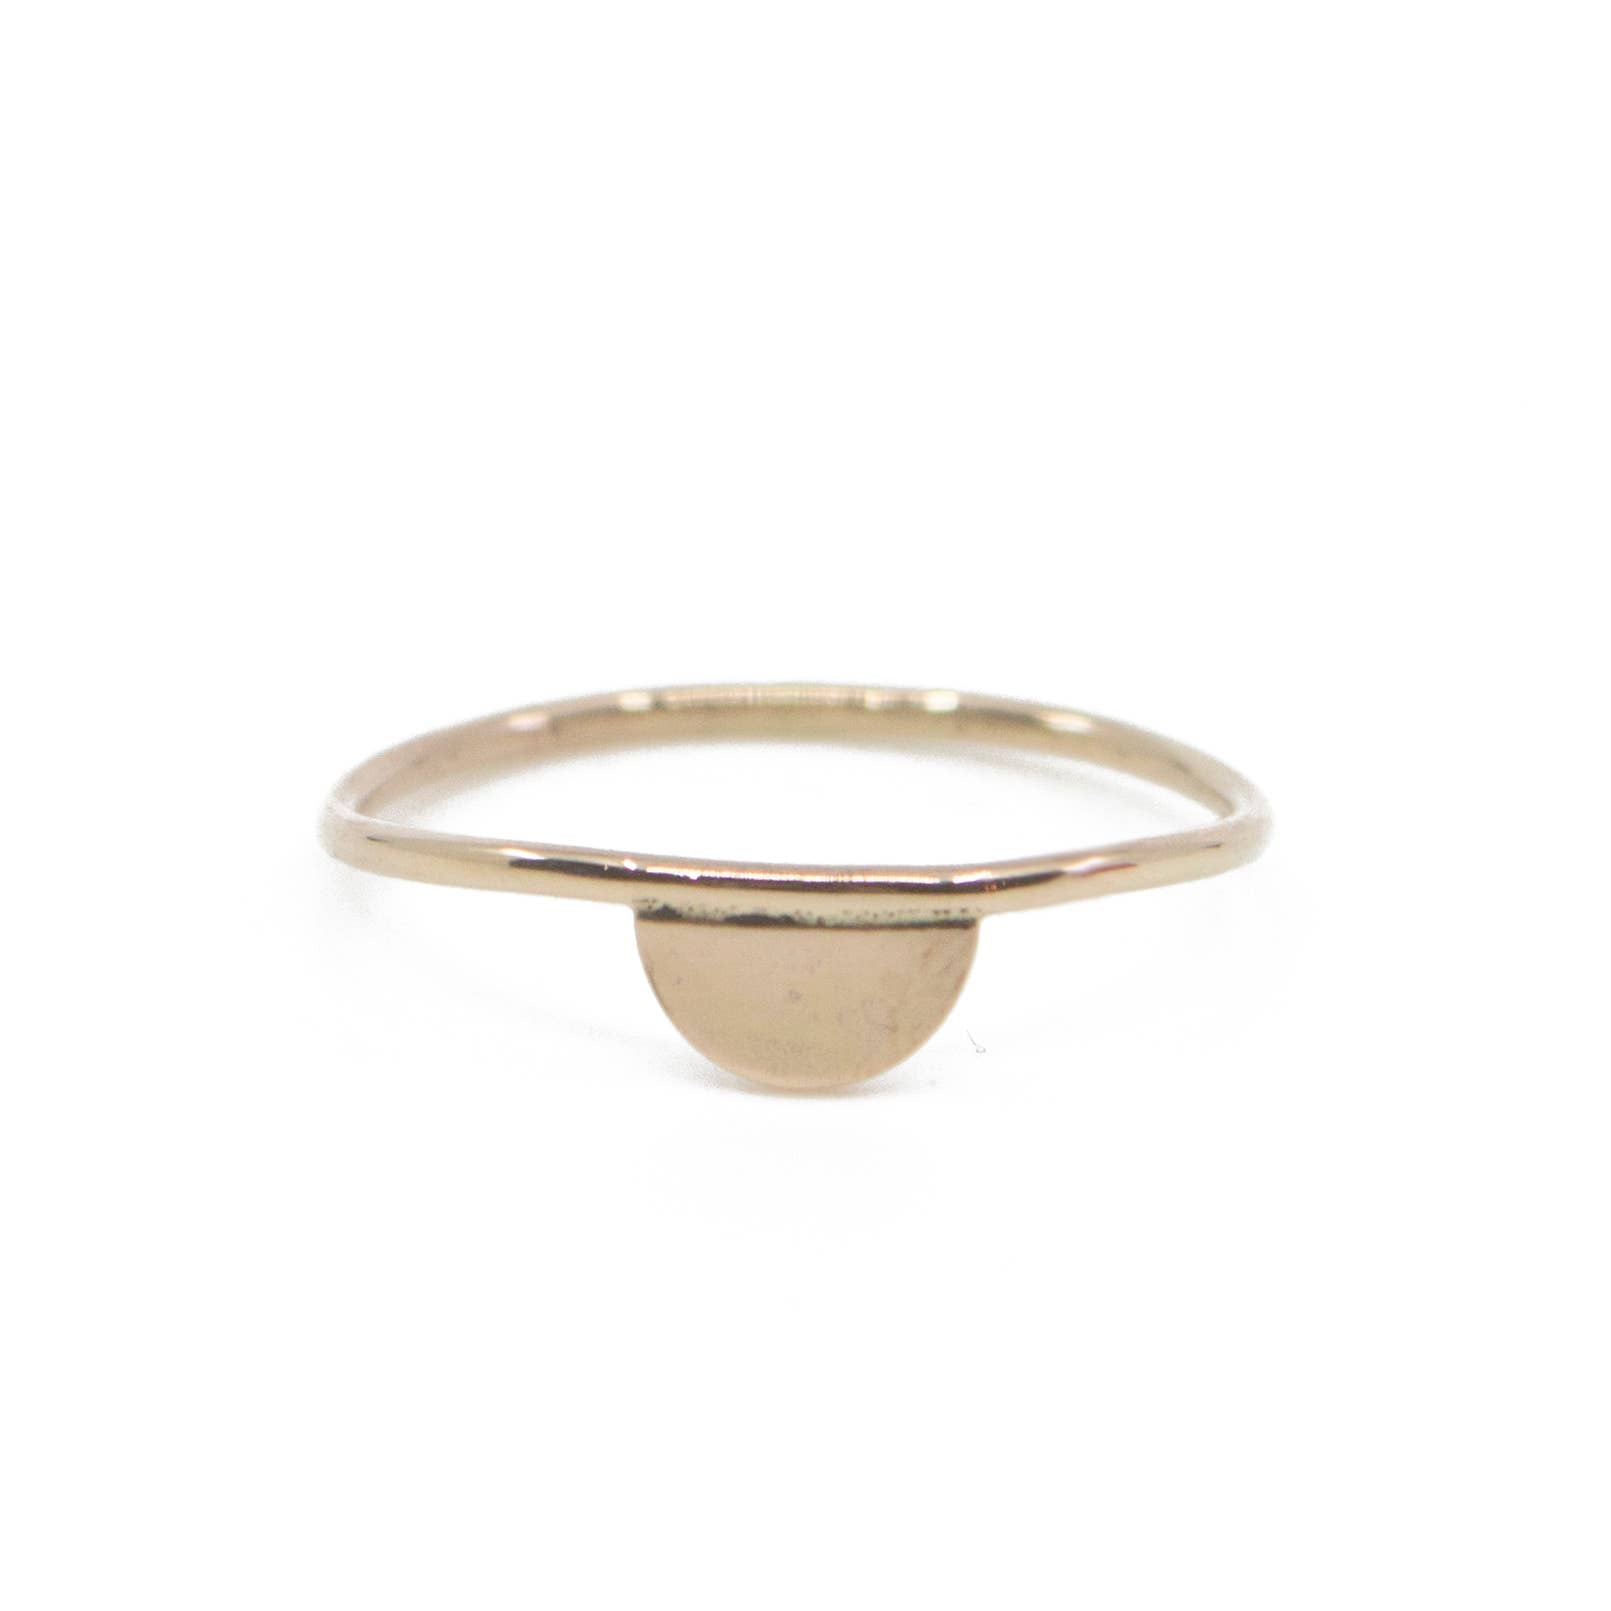 Dainty Half Moon Stacking Ring 14k Gold Filled Rings